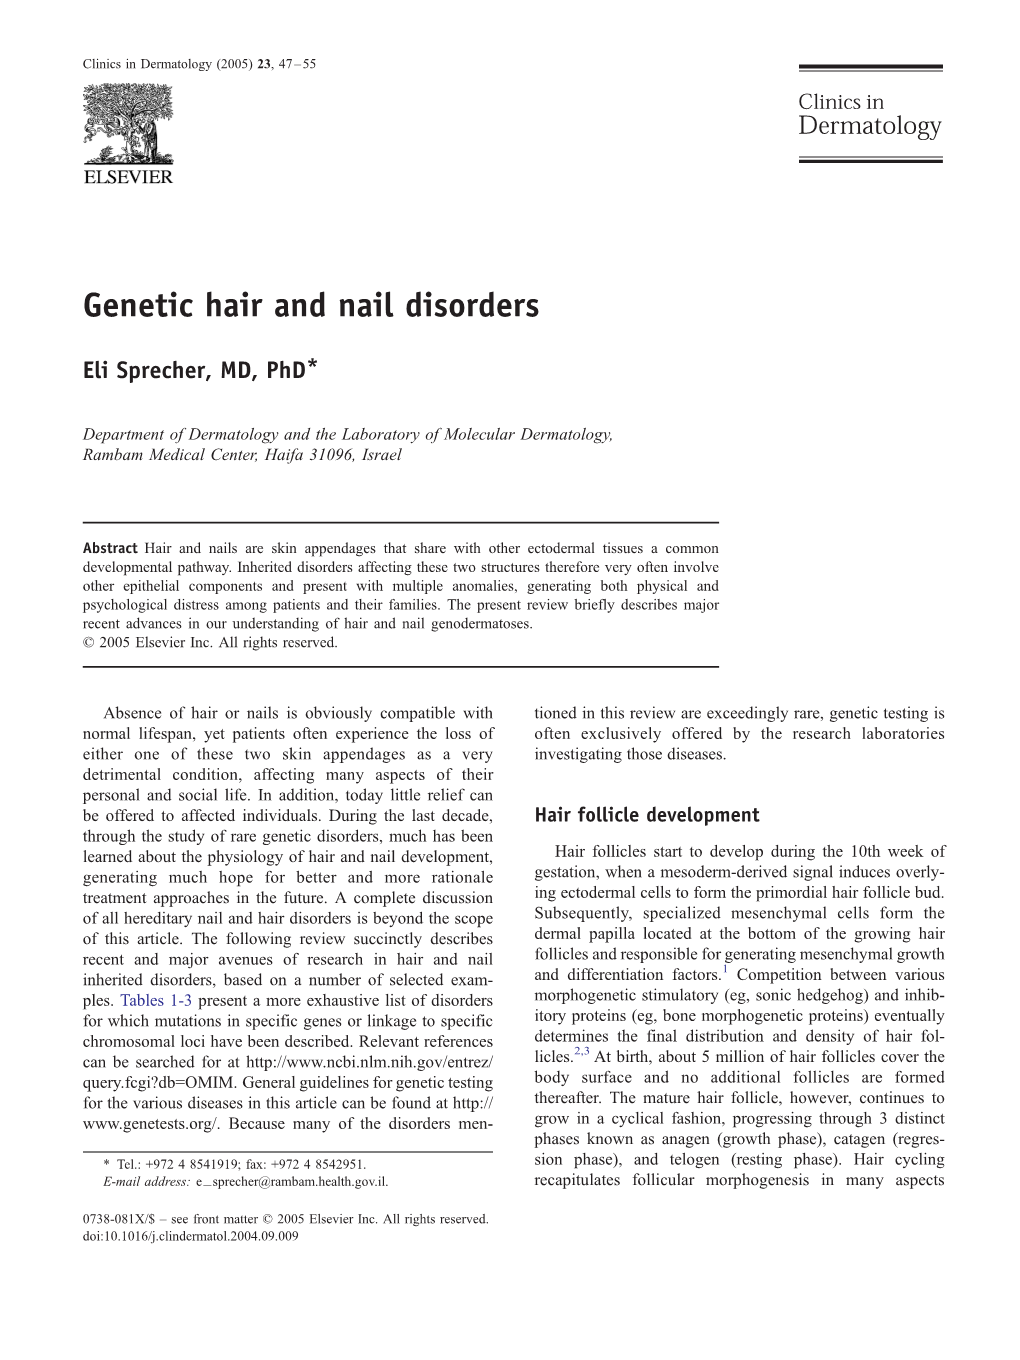 Genetic Hair and Nail Disorders